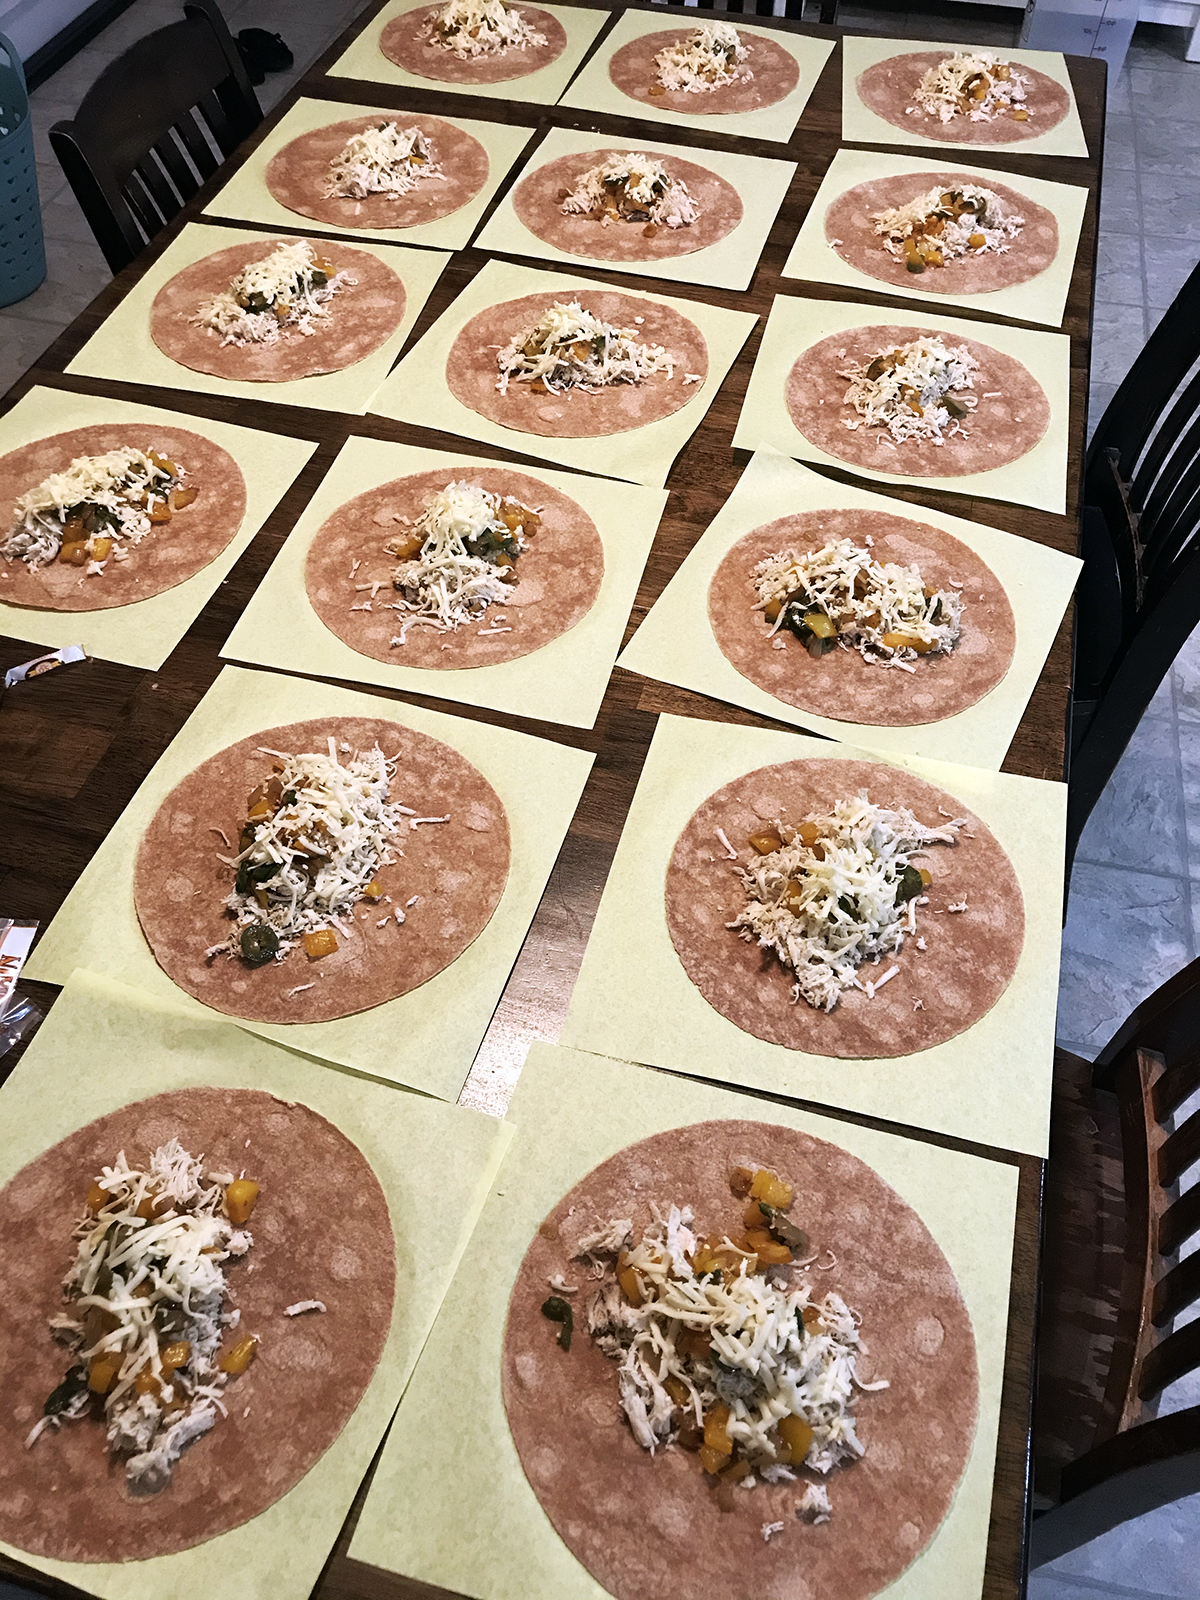 burritos assembled in an array on kitchen table